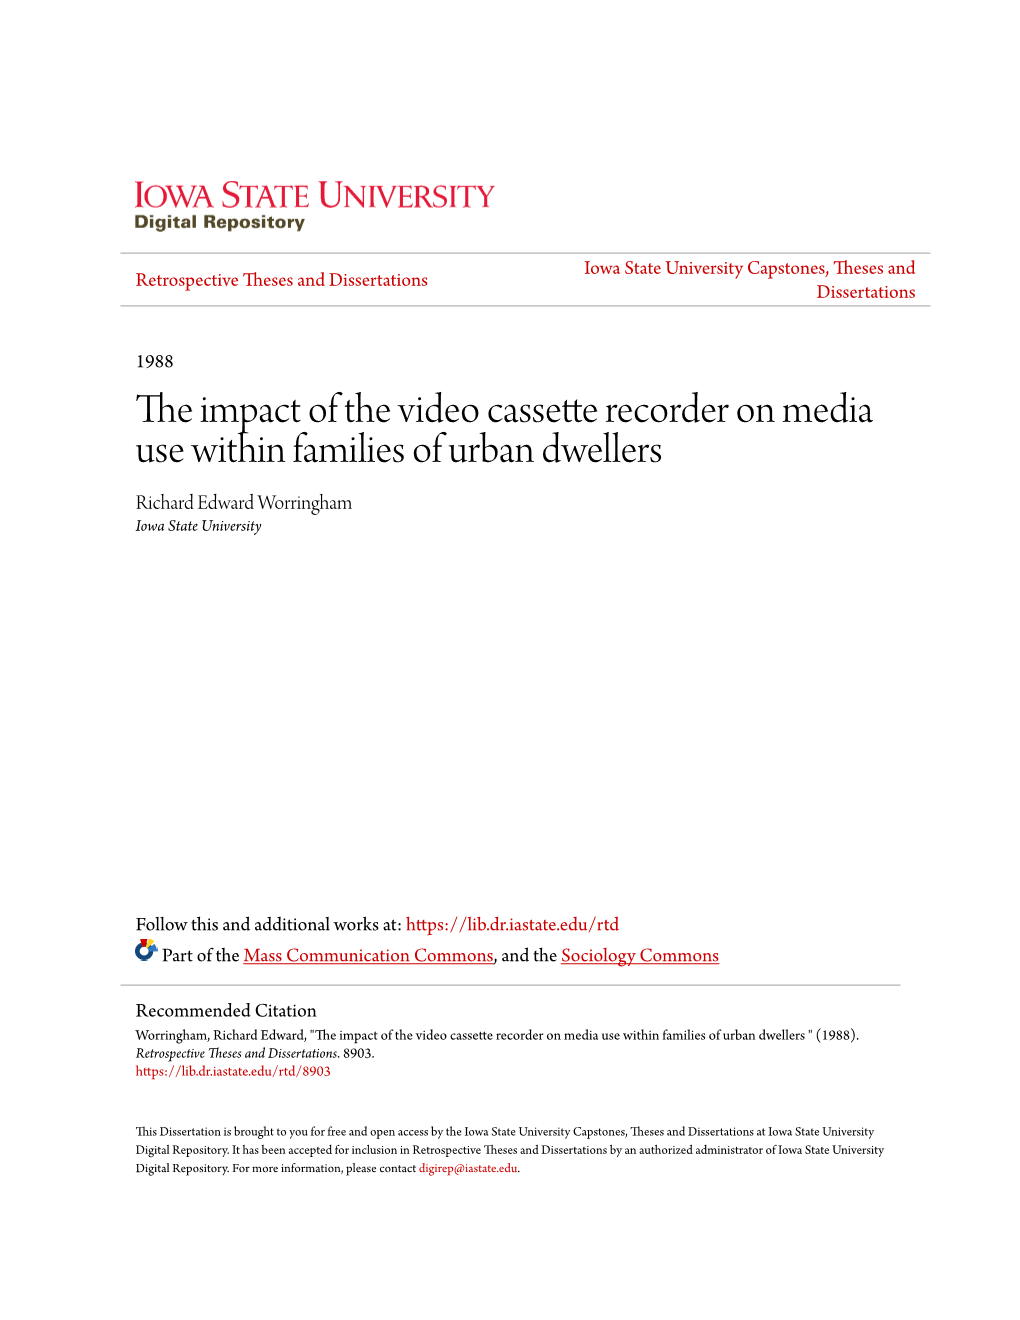 The Impact of the Video Cassette Recorder on Media Use Within Families of Urban Dwellers Richard Edward Worringham Iowa State University